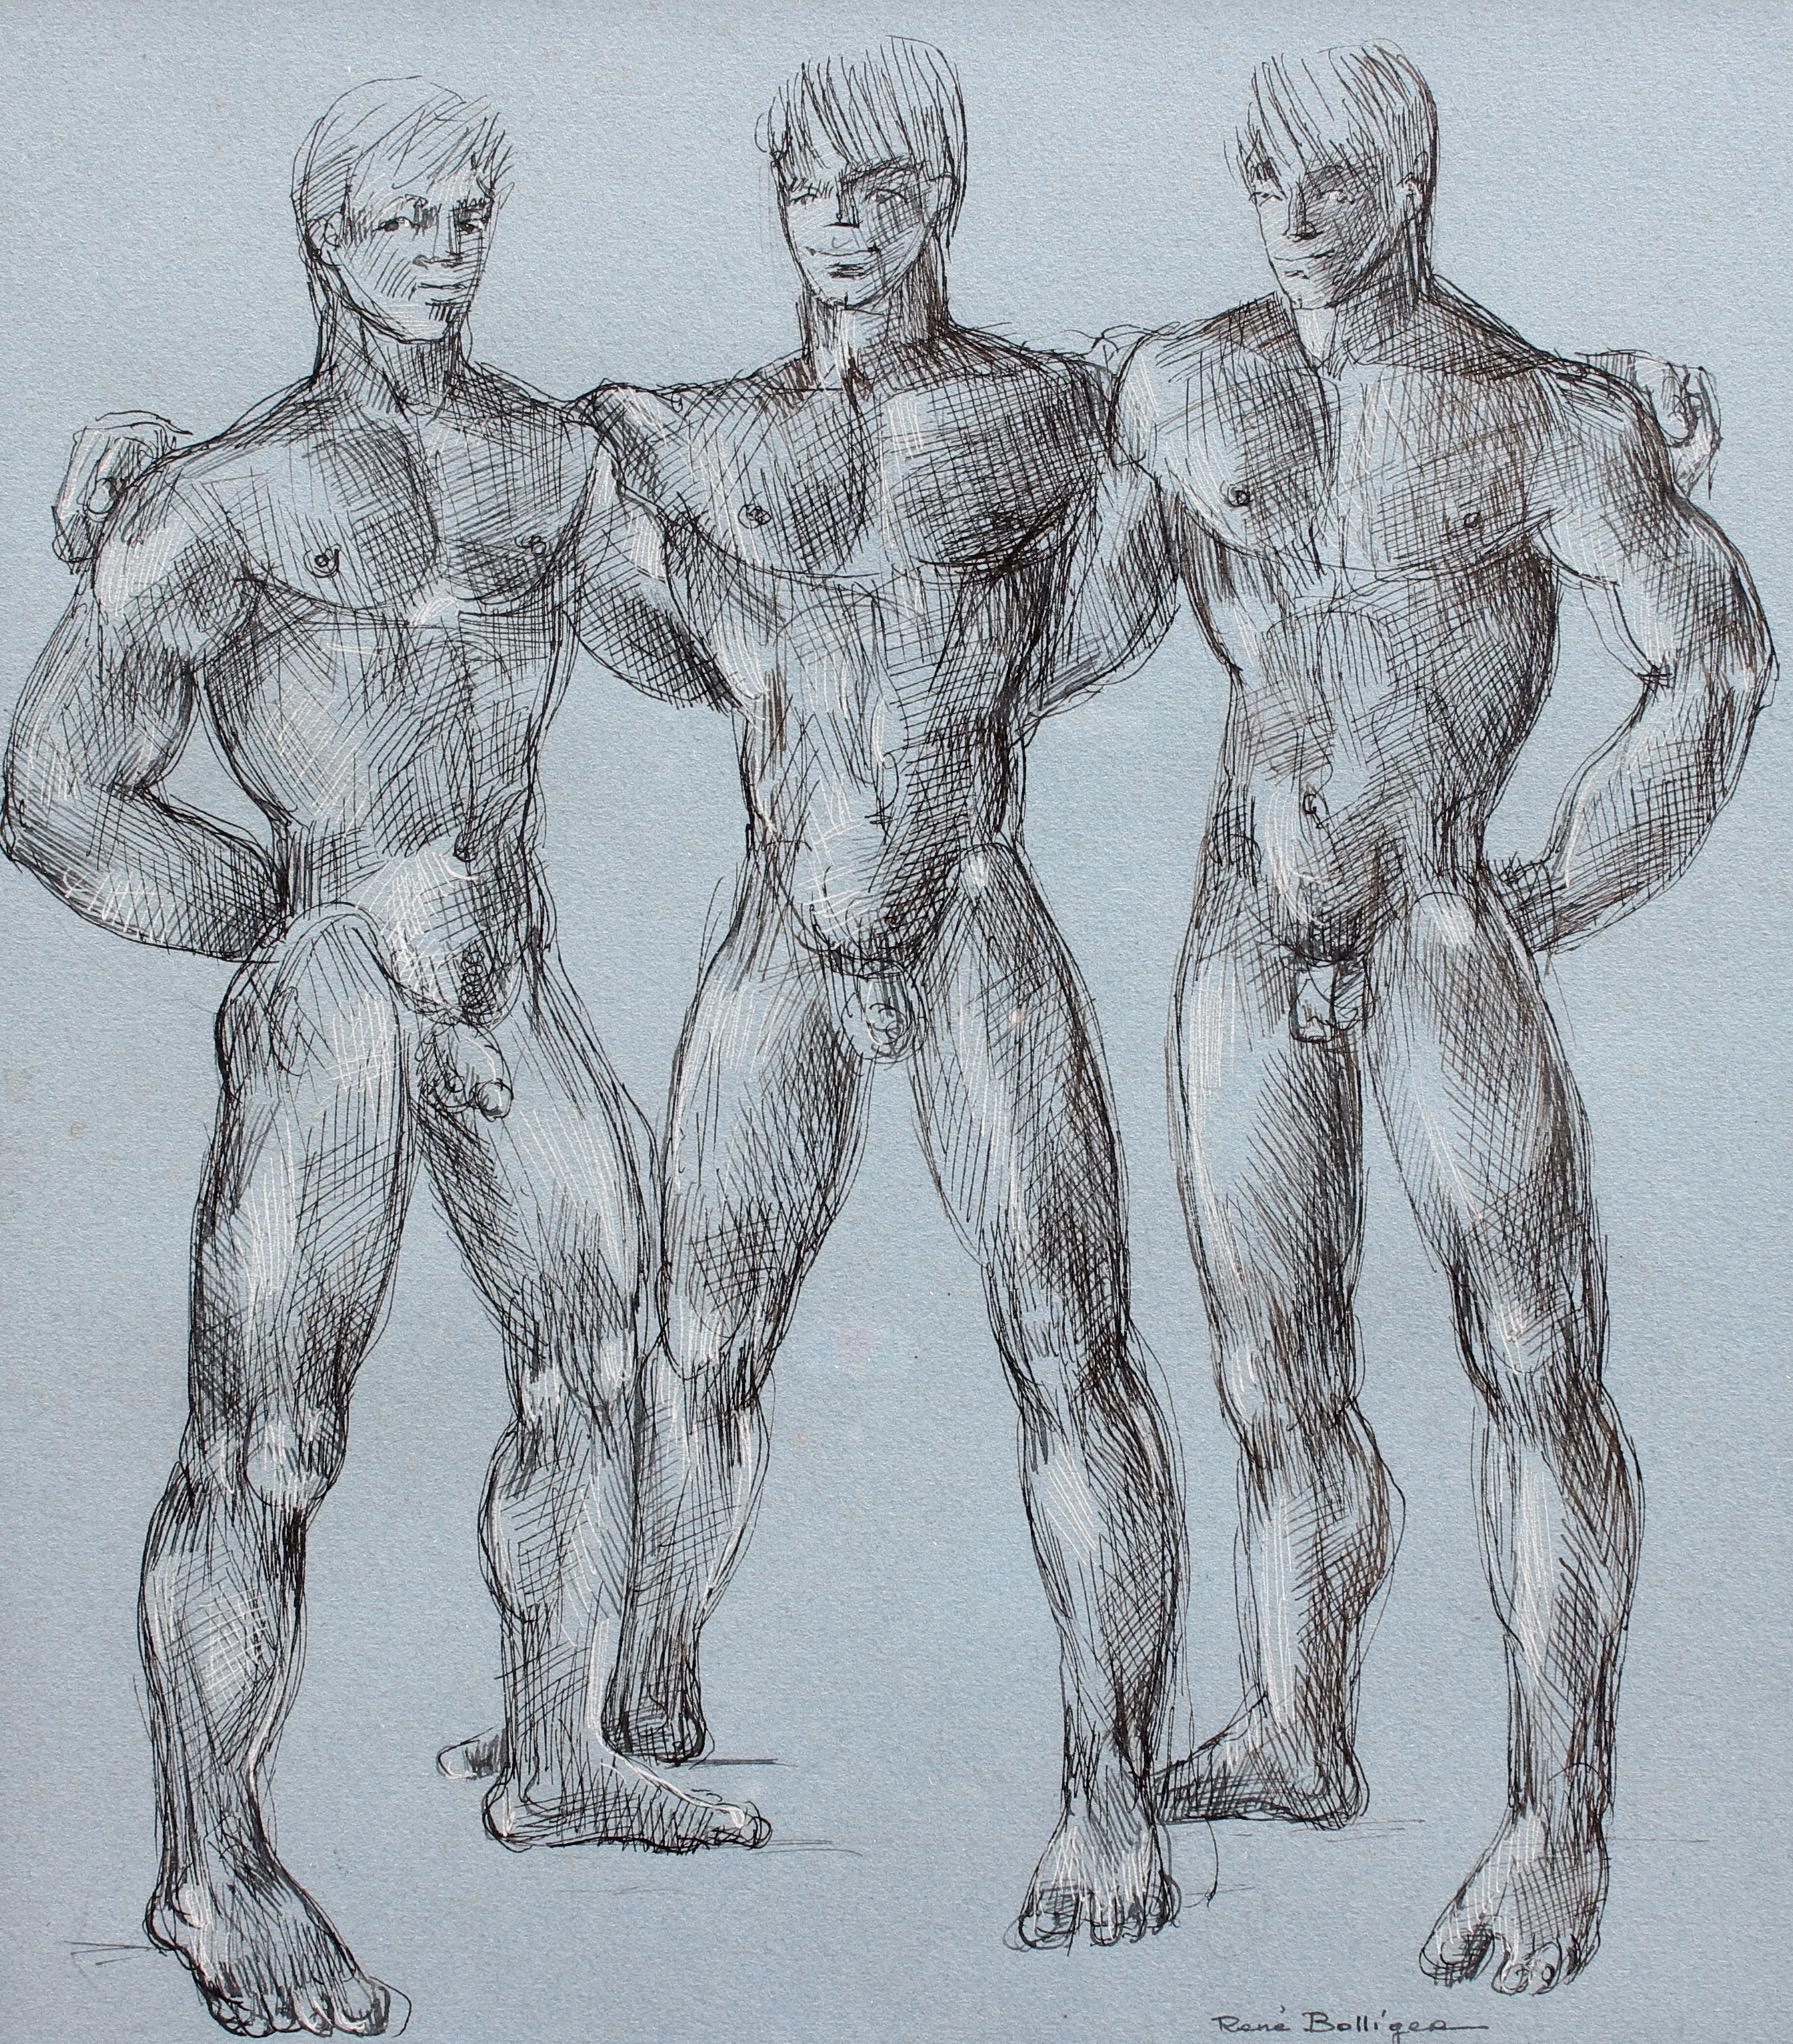 'Muscles, Muscles and More Muscles' by René Bolliger, Male Nude Erotica c. 1960s - Art by René Bolliger 